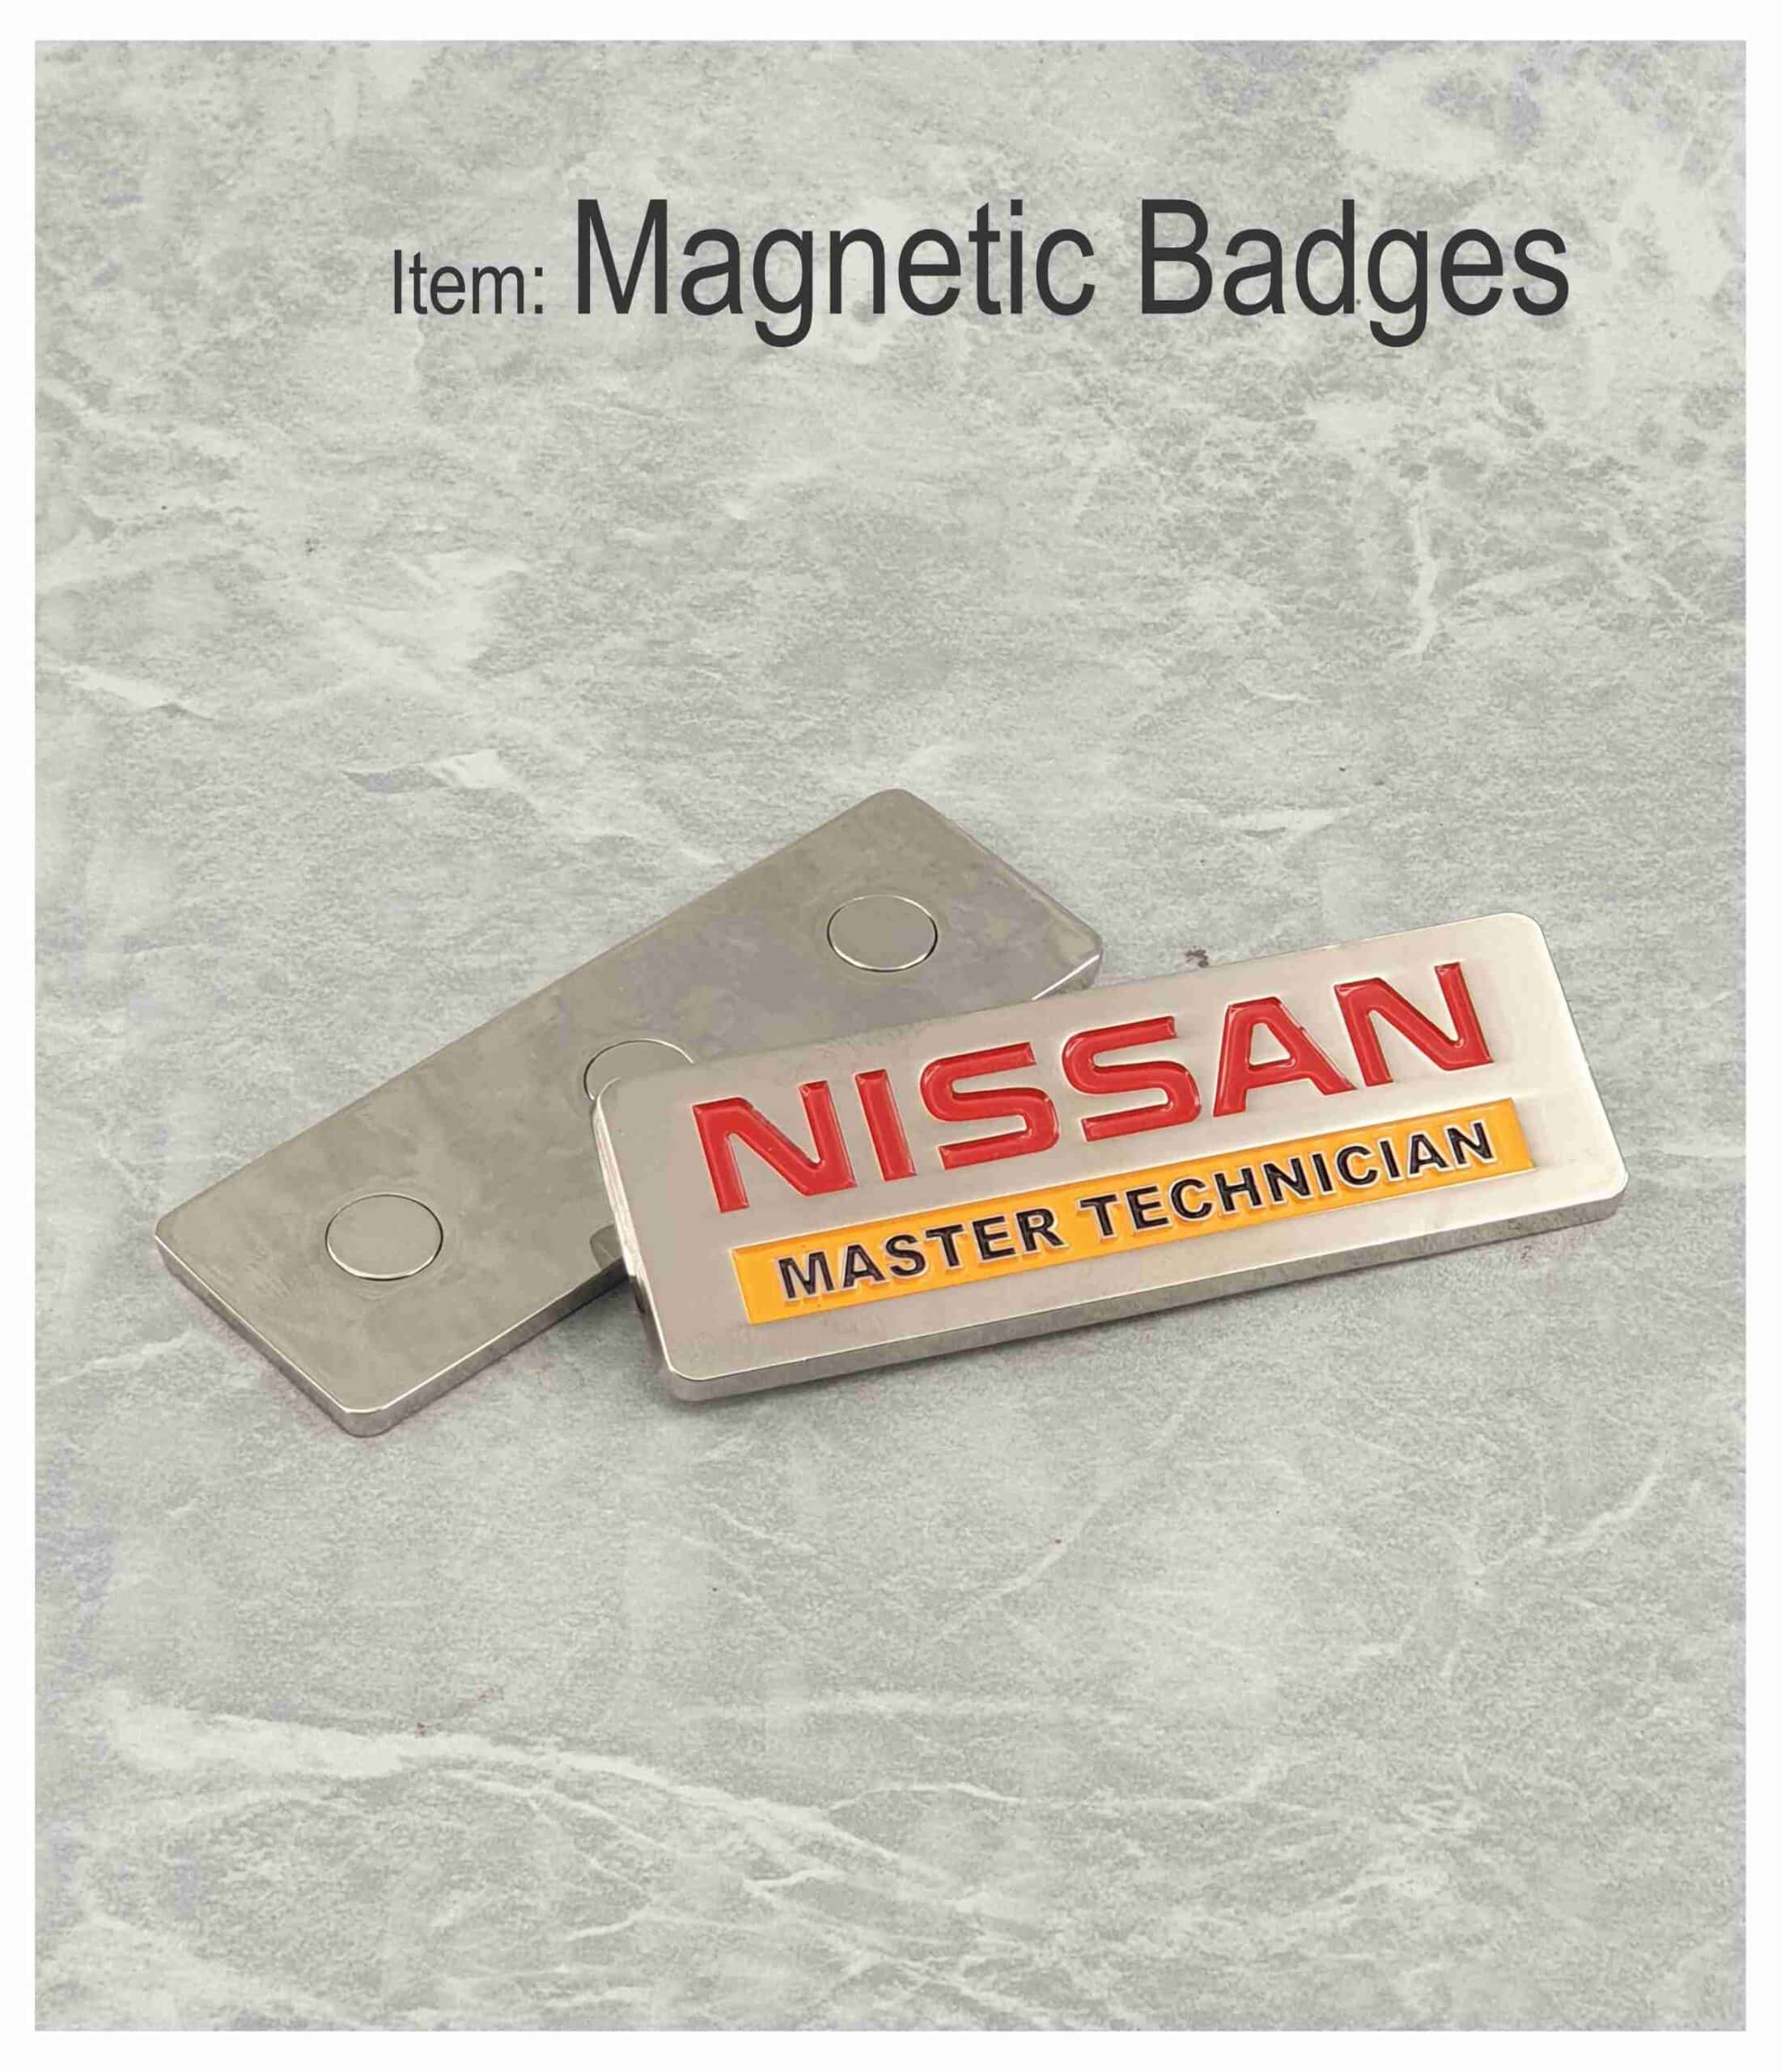 Magnetic Badges scaled